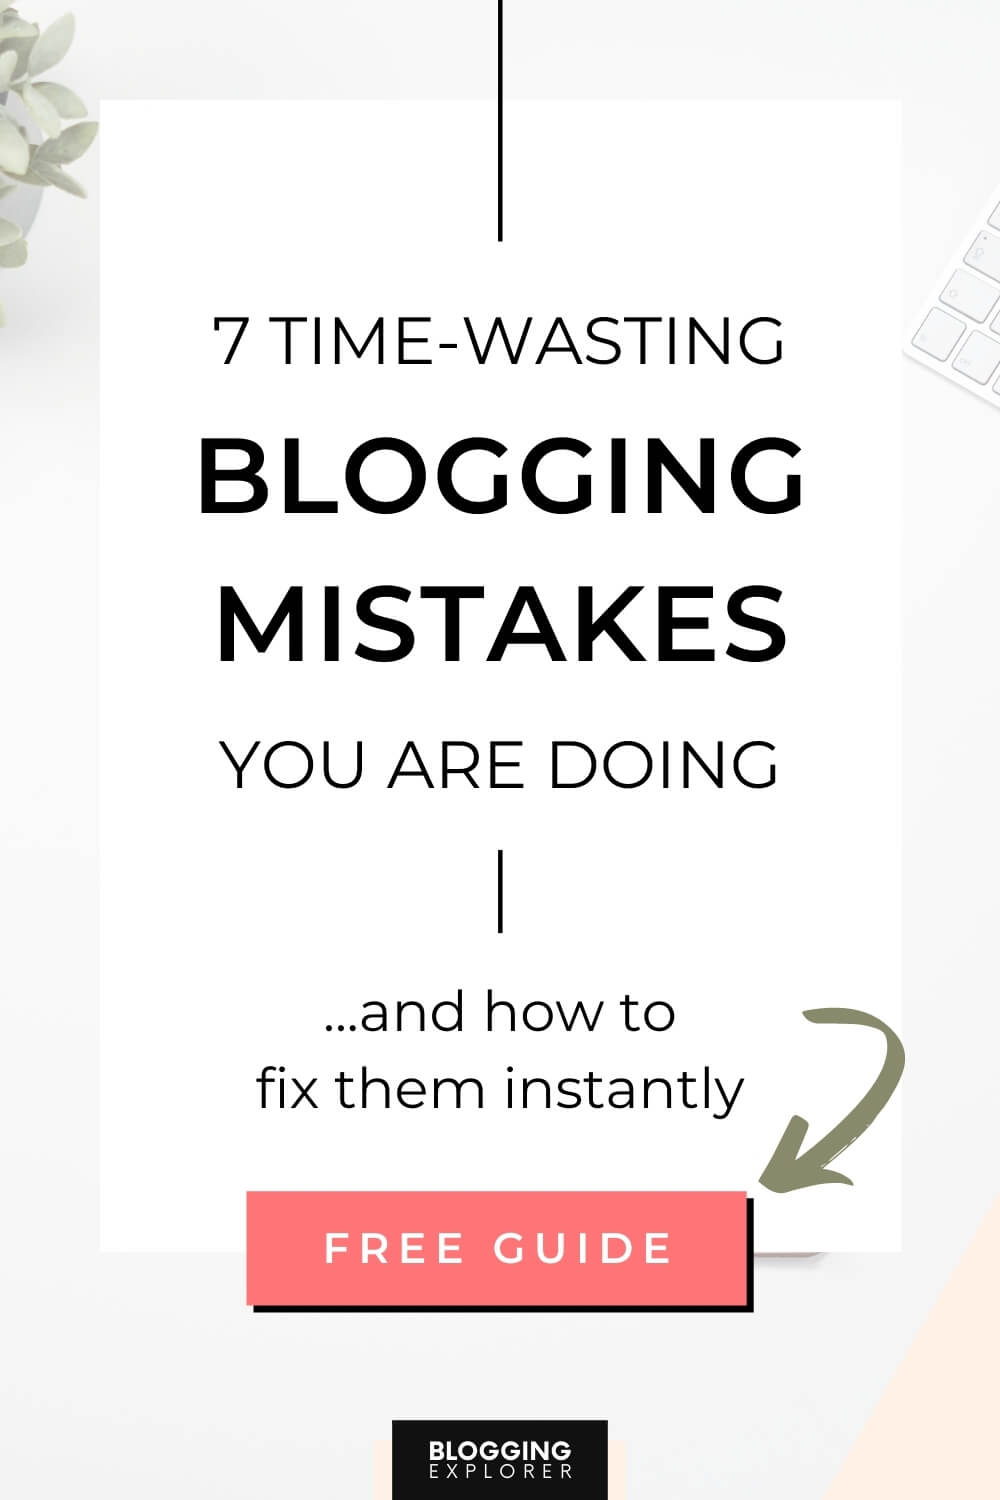 Most common blogging mistakes for beginners and how to avoid them - Blogging Explorer